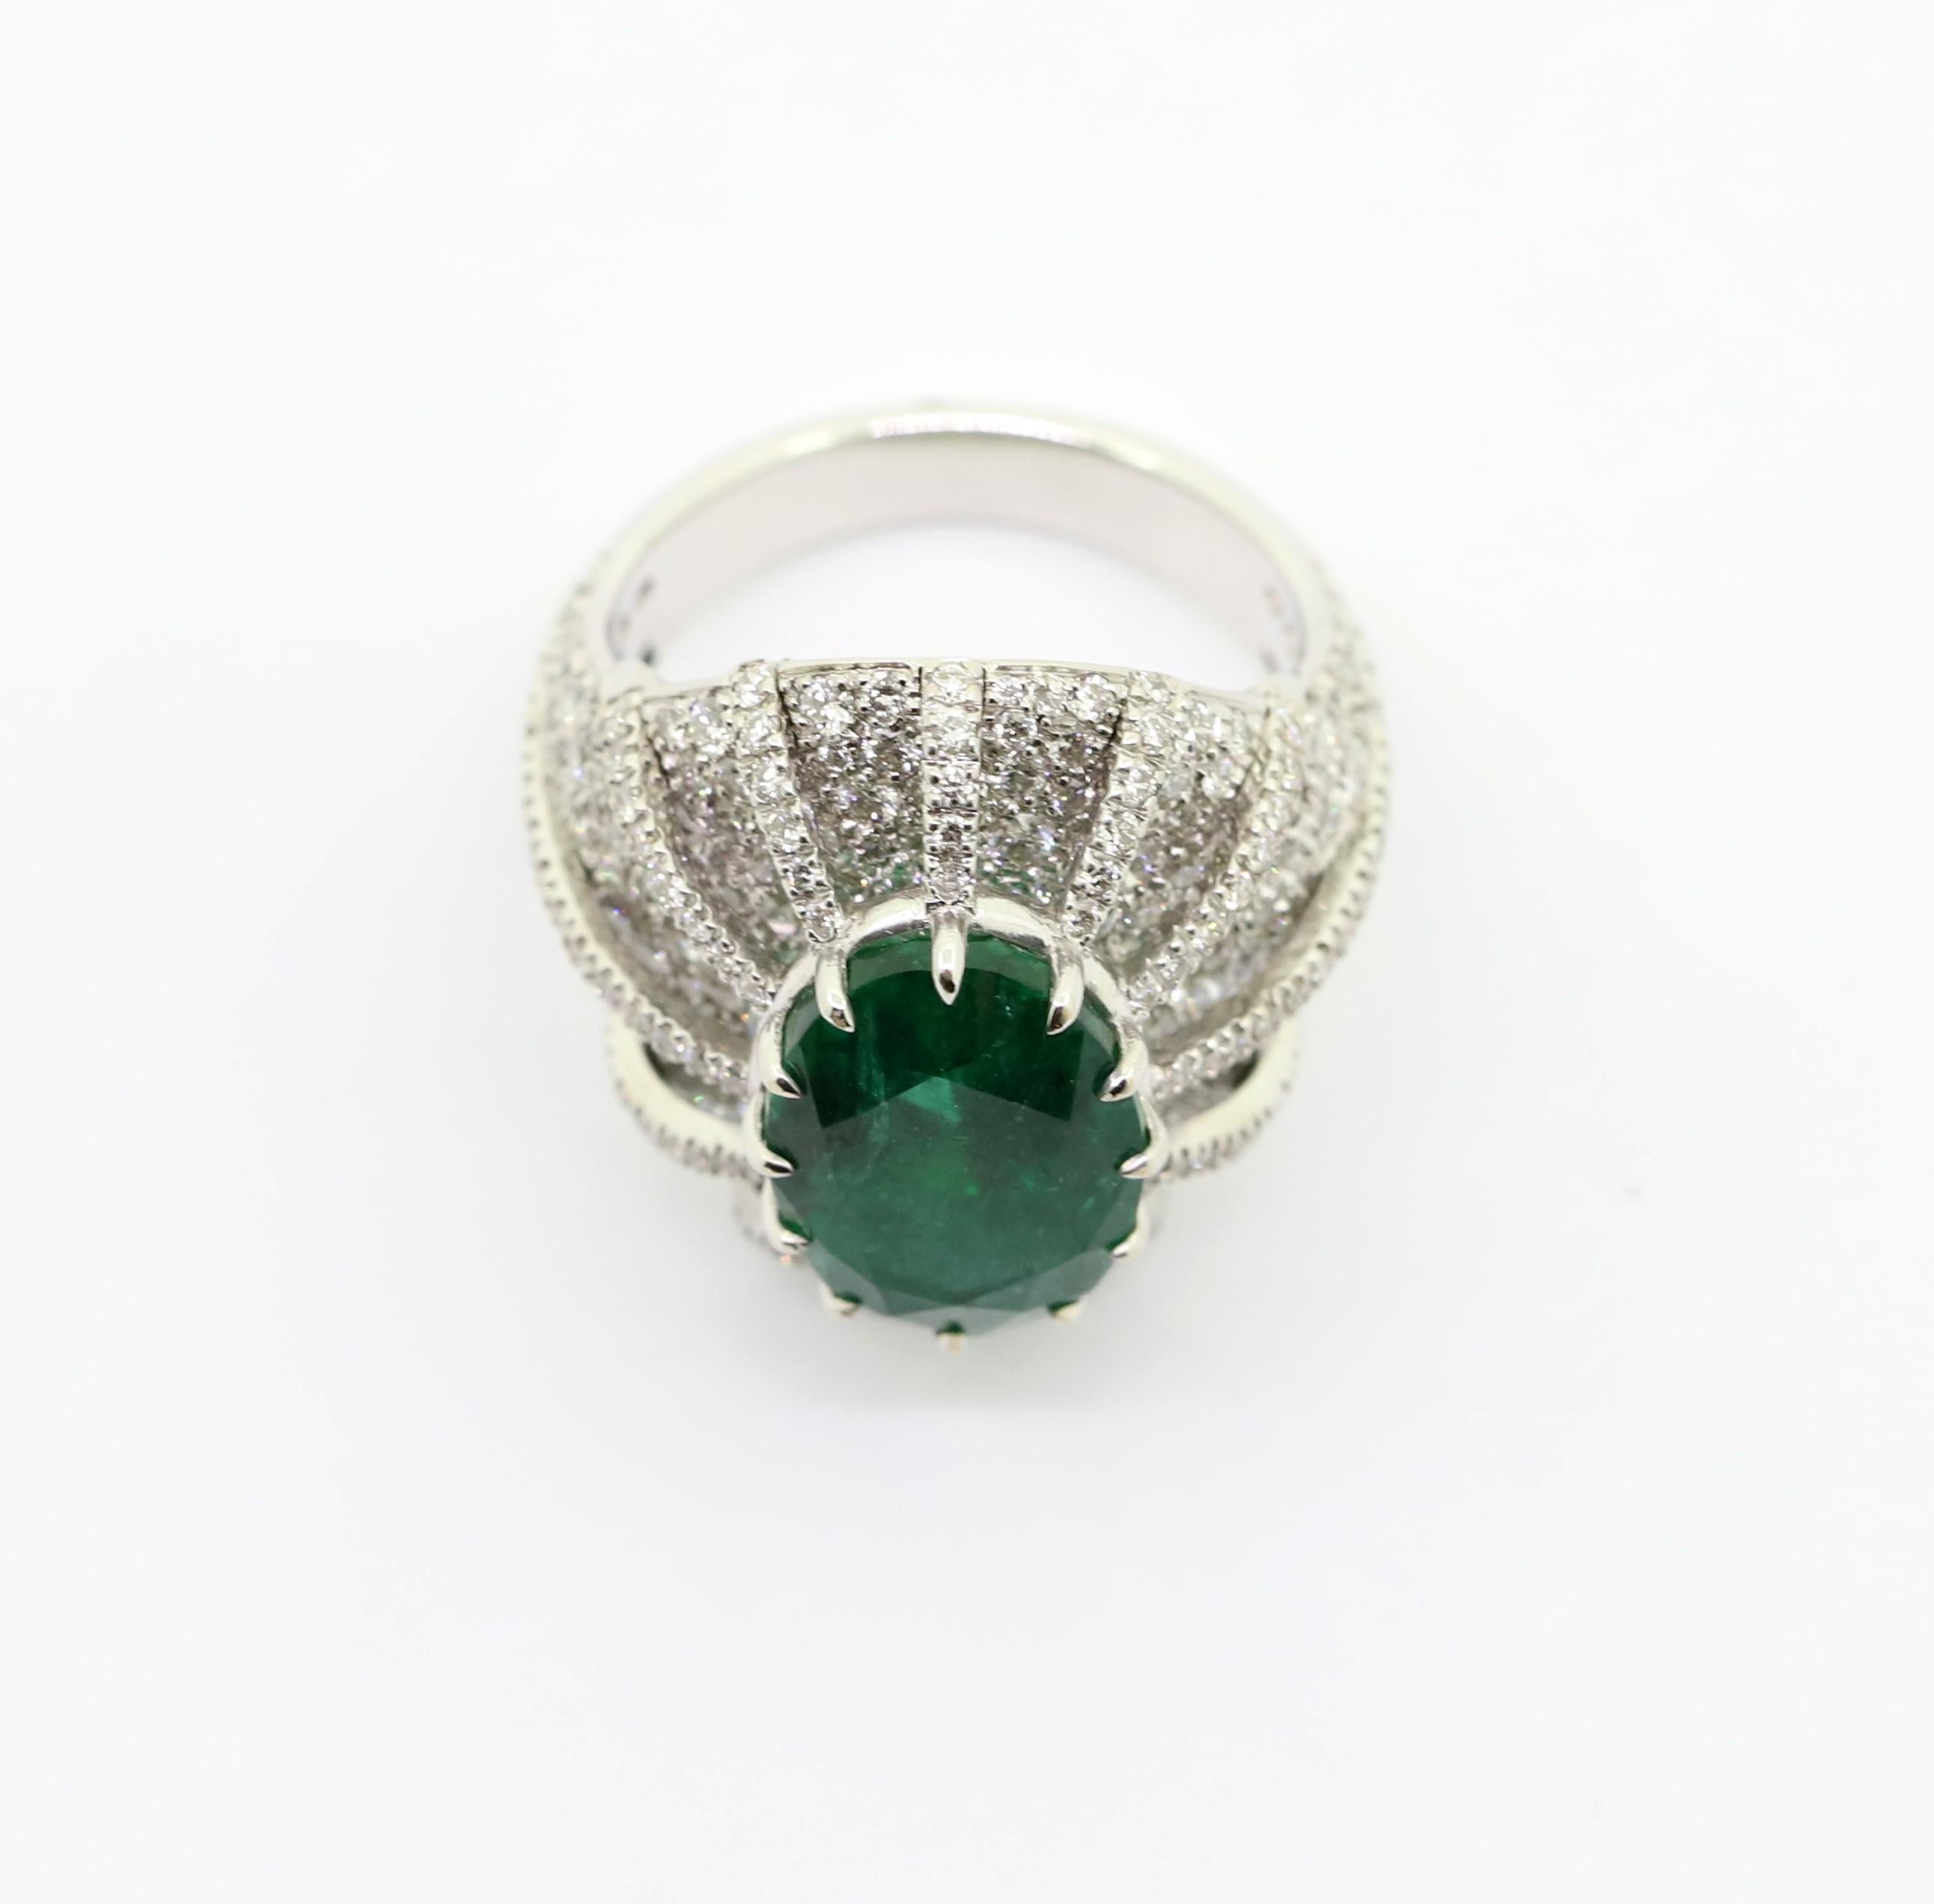 Elegant 18kt White Gold Cocktail  Ring featuring a Vibrant 5,28 Carat Oval Emerald, surrounded by White Diamond pavè of 2.40 Carat total.
This ring is entirely Hand-Made in Italy.

